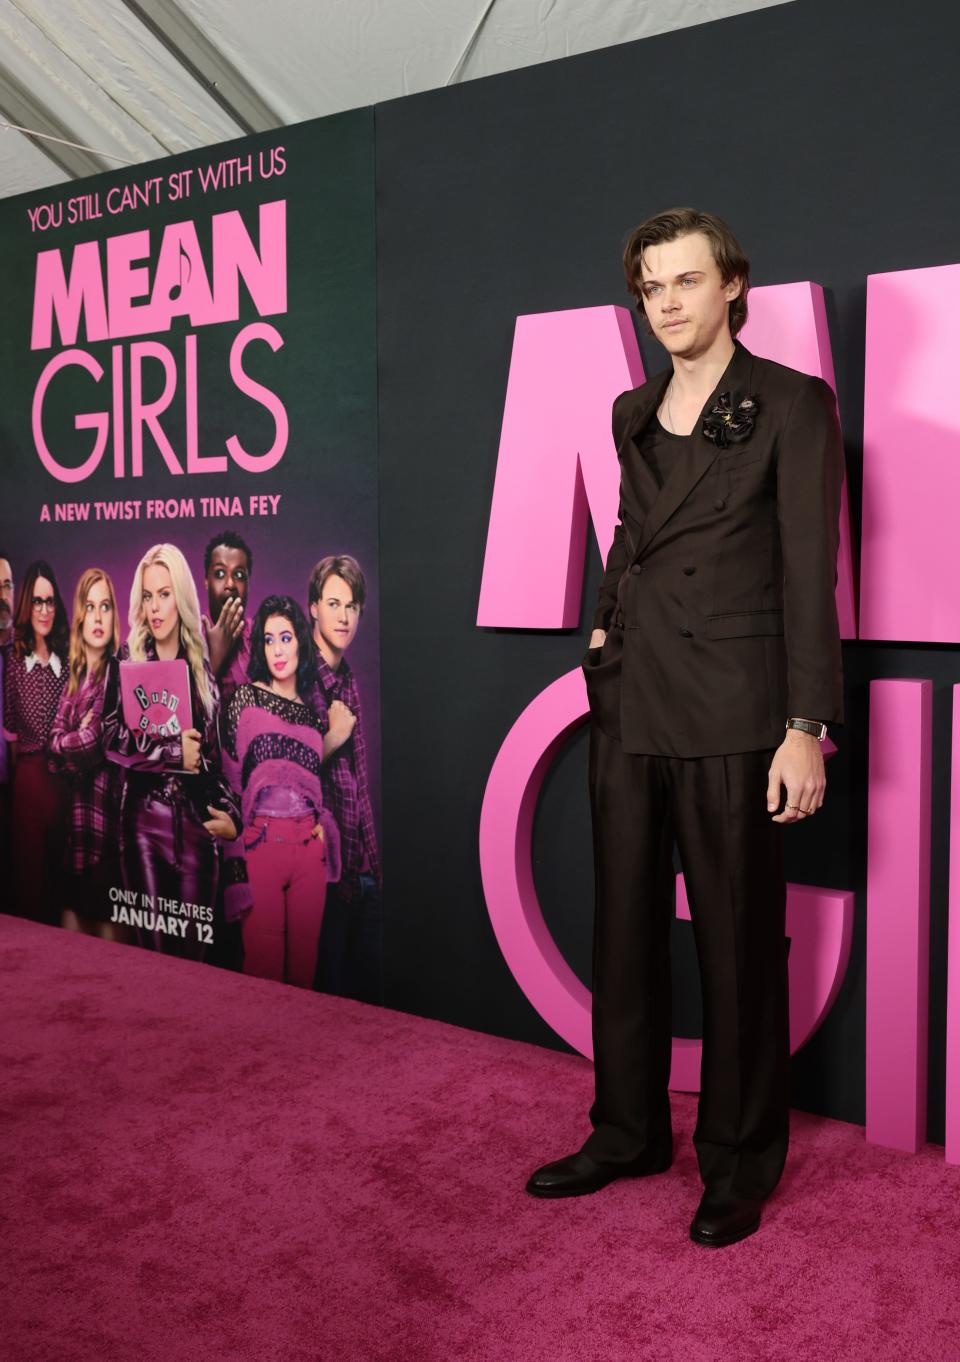 Christopher Briney at the "Mean Girls" premiere at AMC Lincoln Square Theater in New York City.